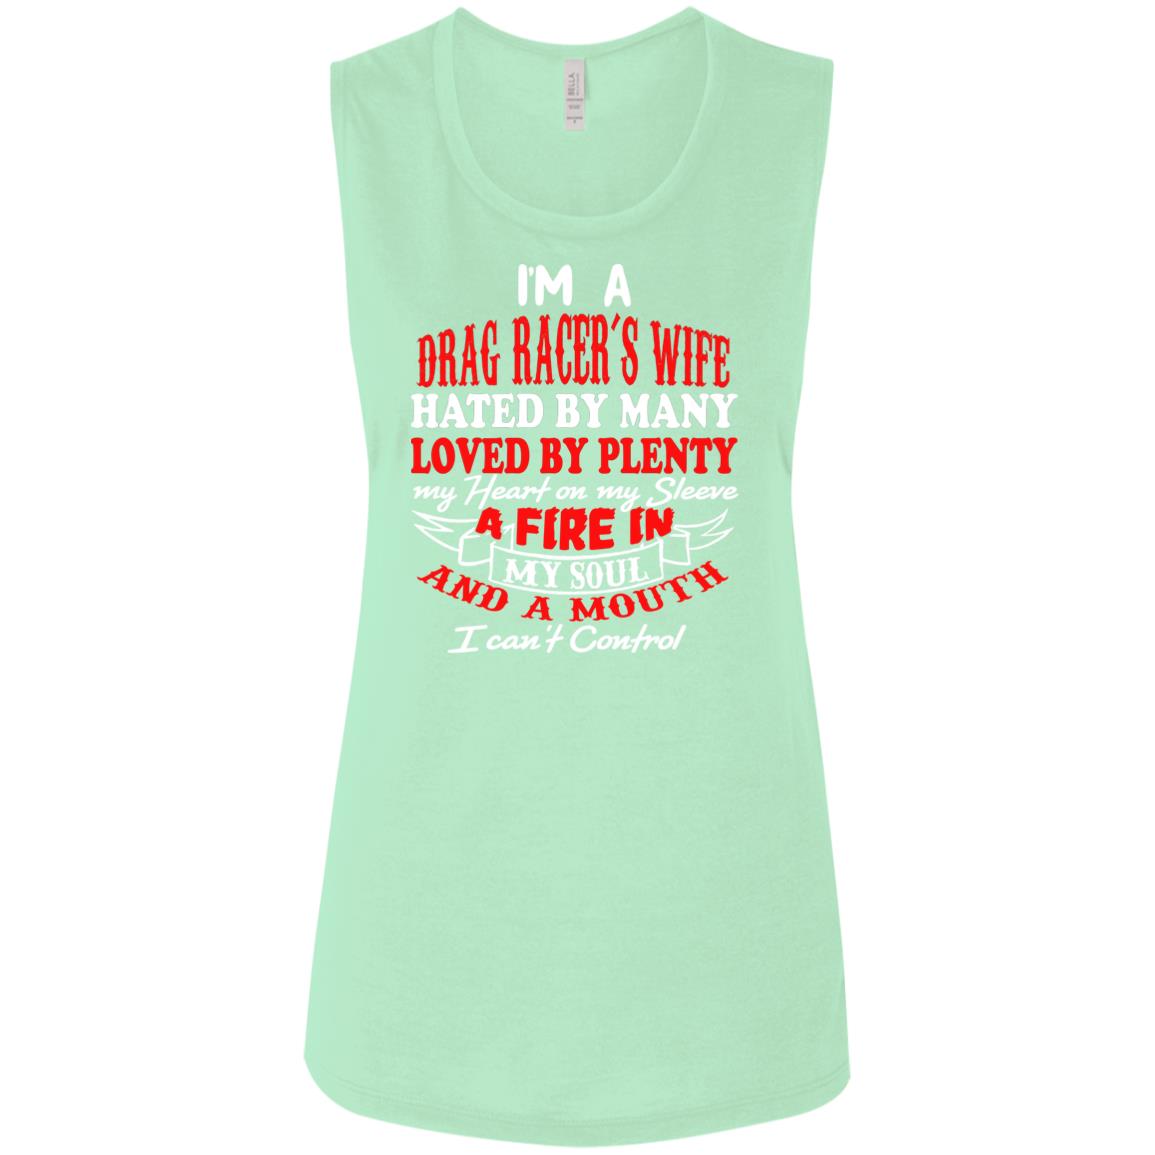 I'm A Drag Racer's Wife Hated By Many Loved By Plenty Ladies' Flowy Muscle Tank